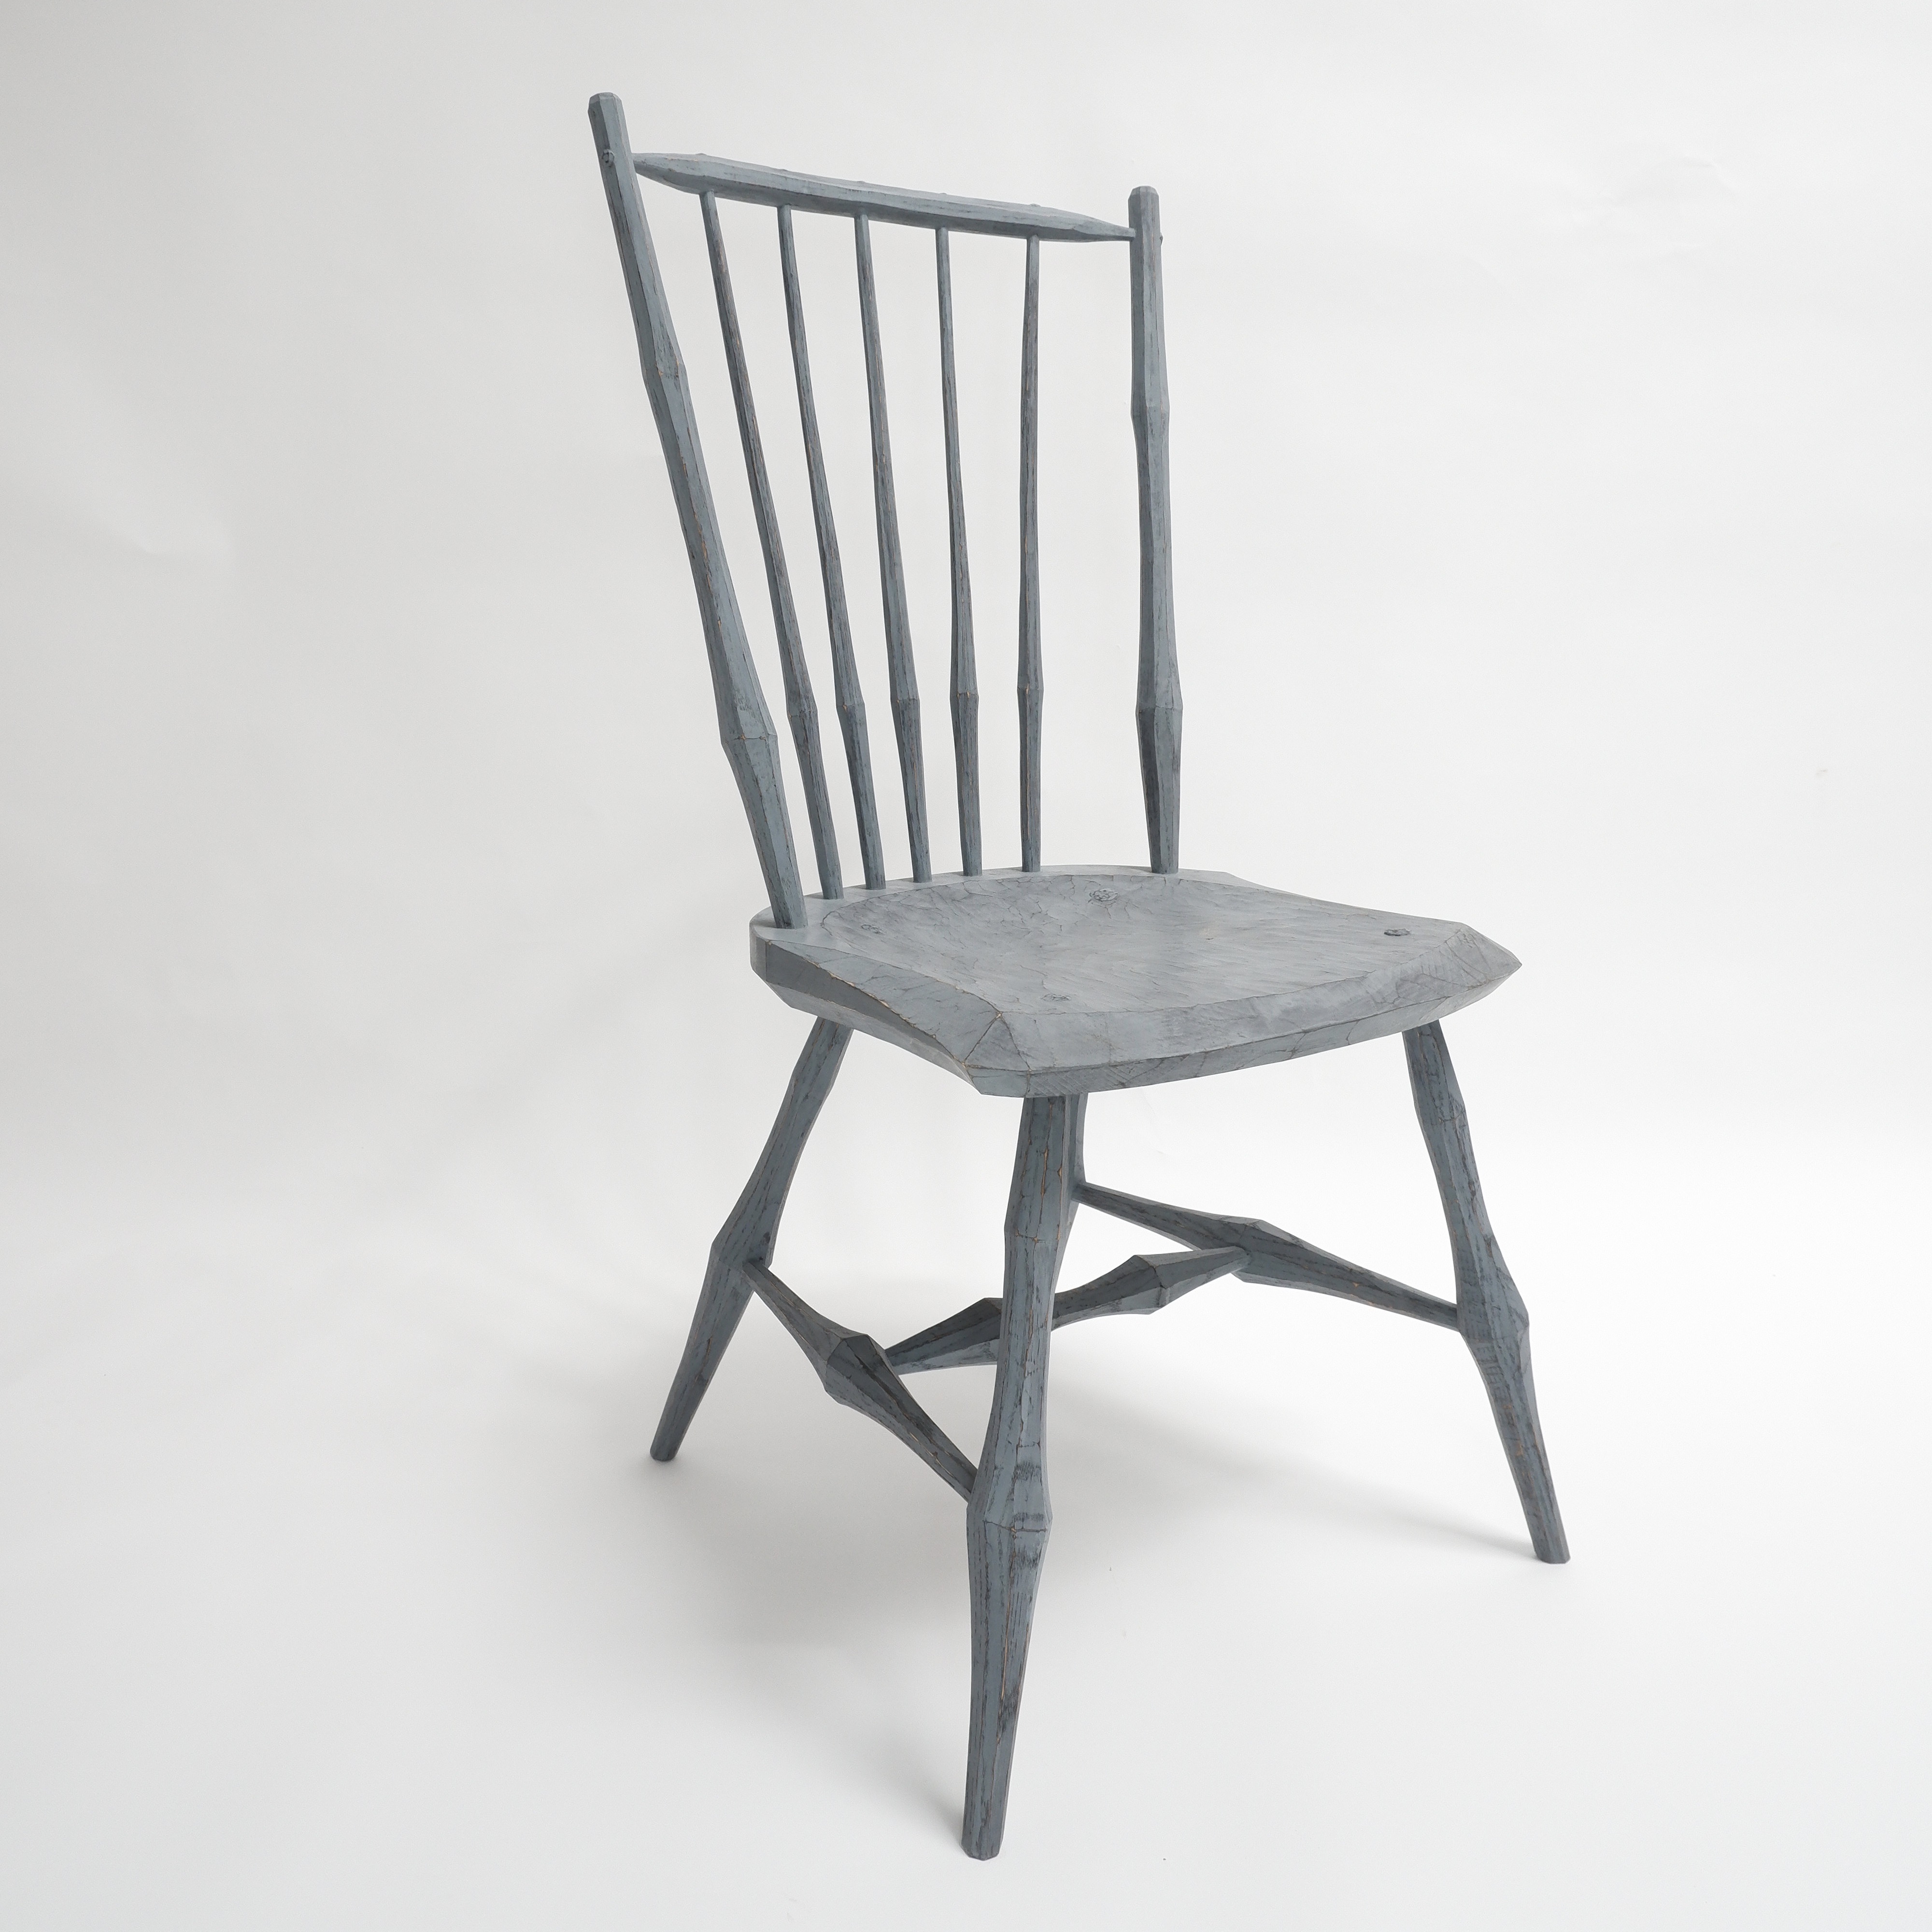 Image of a chair made by the artist, John Wood.